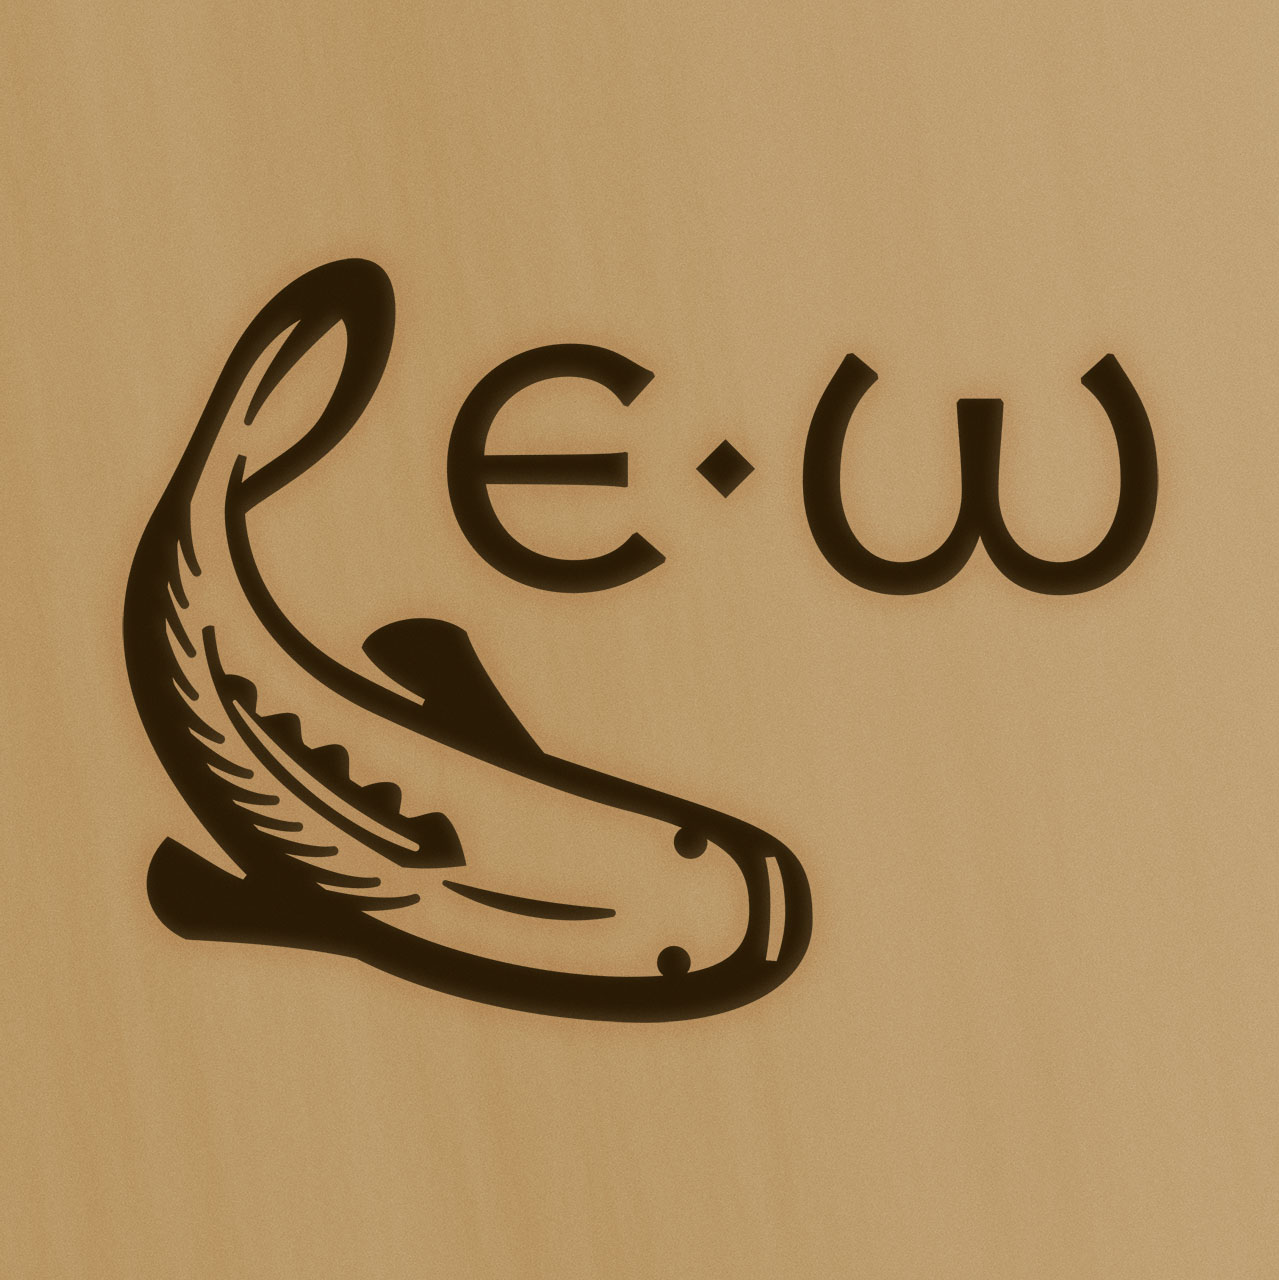 Eric Williams’s logo, an E-W monogram in a handcarved style, seated next to an illustration of an Atlantic Grouper, in leisurely posture.